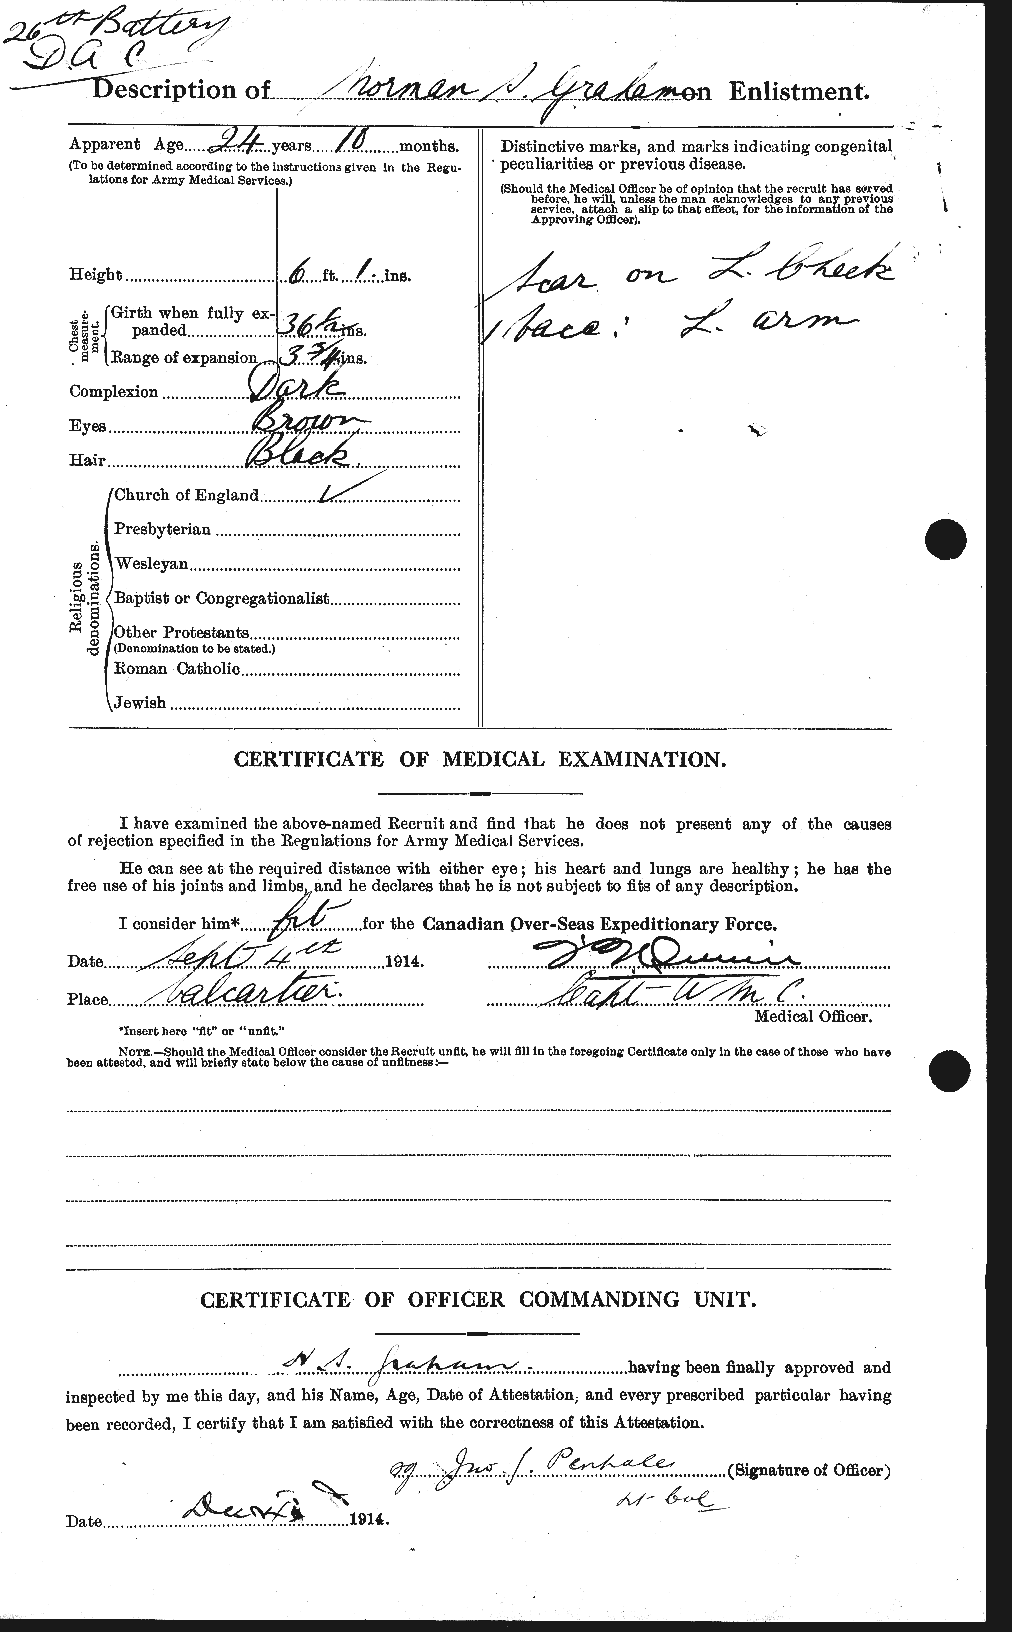 Personnel Records of the First World War - CEF 359326b